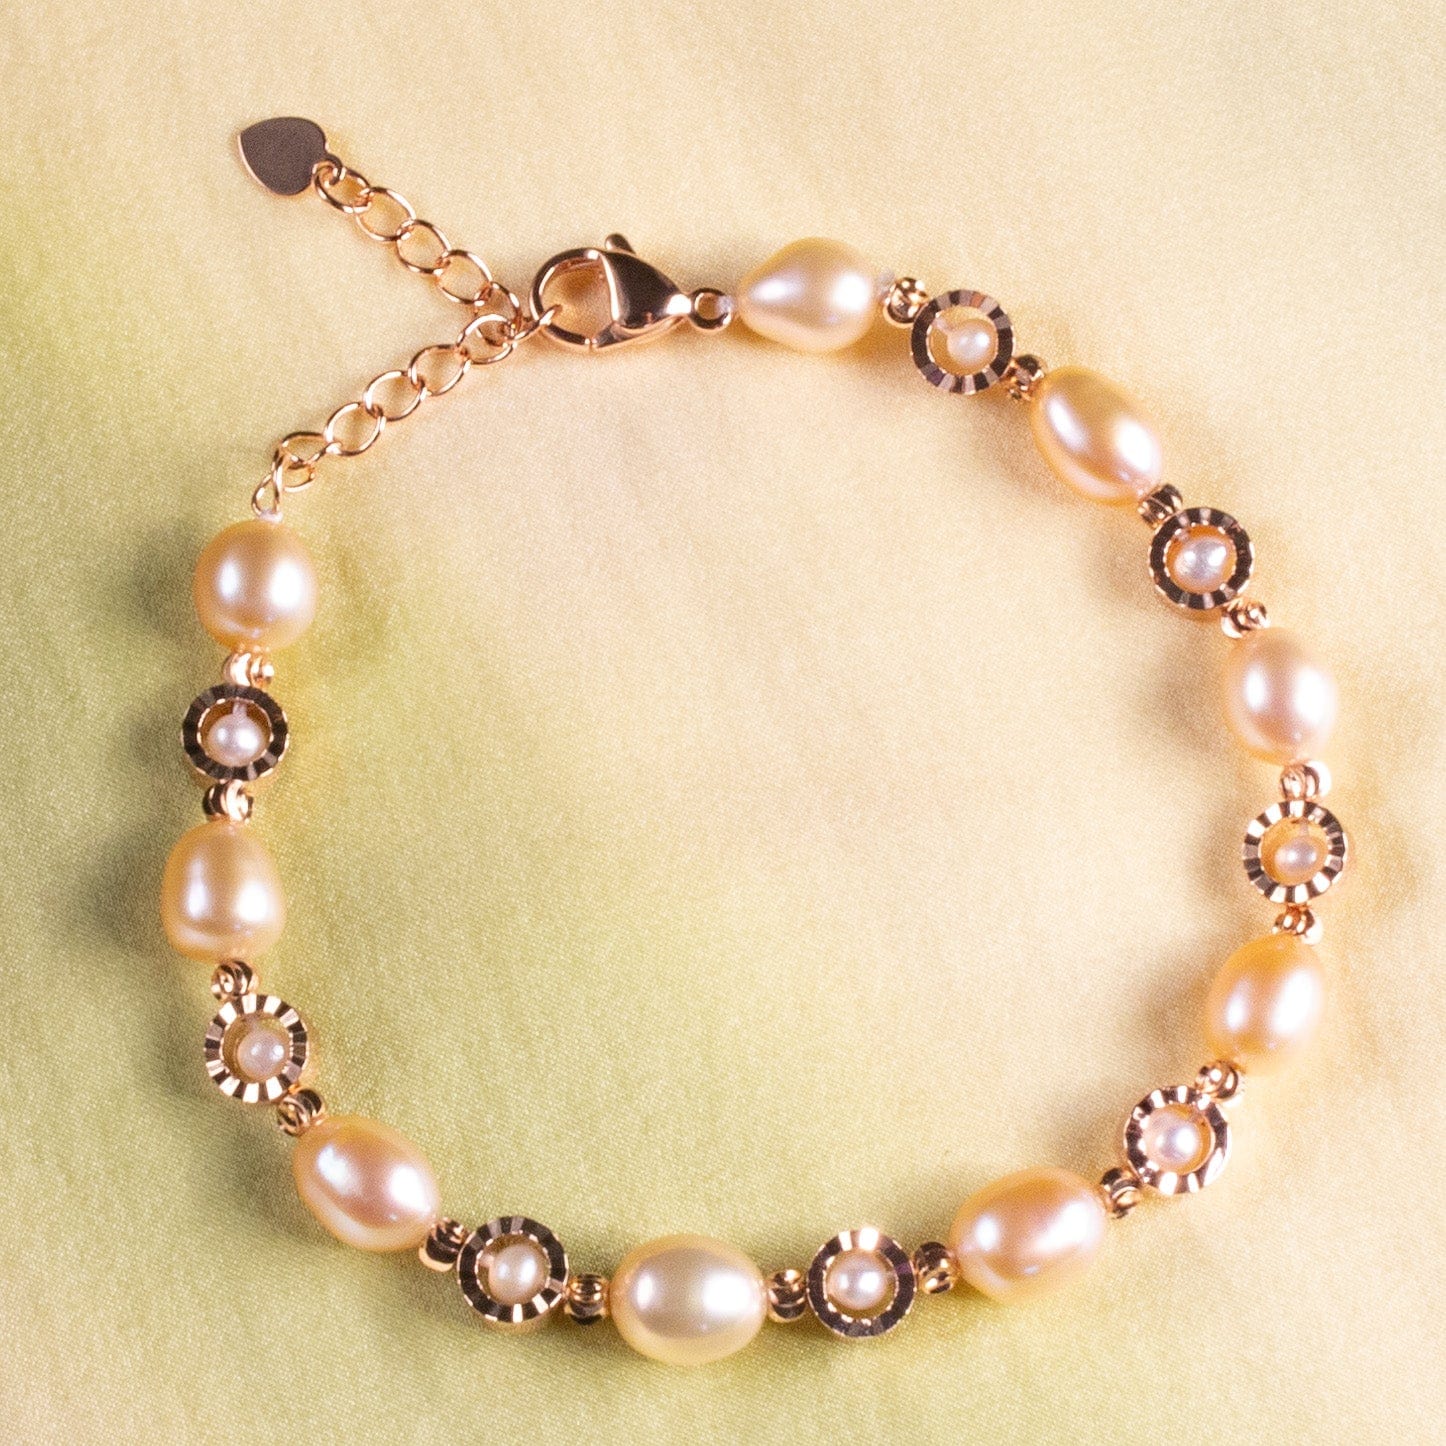 Arbor Trading Post Bracelets Handcrafted Pink Cultured Freshwater Baroque Pearl Bracelet with Rose Gold Finish Chain and Beads, 6mm x 8mm Pearl, 7.5 Inch Long